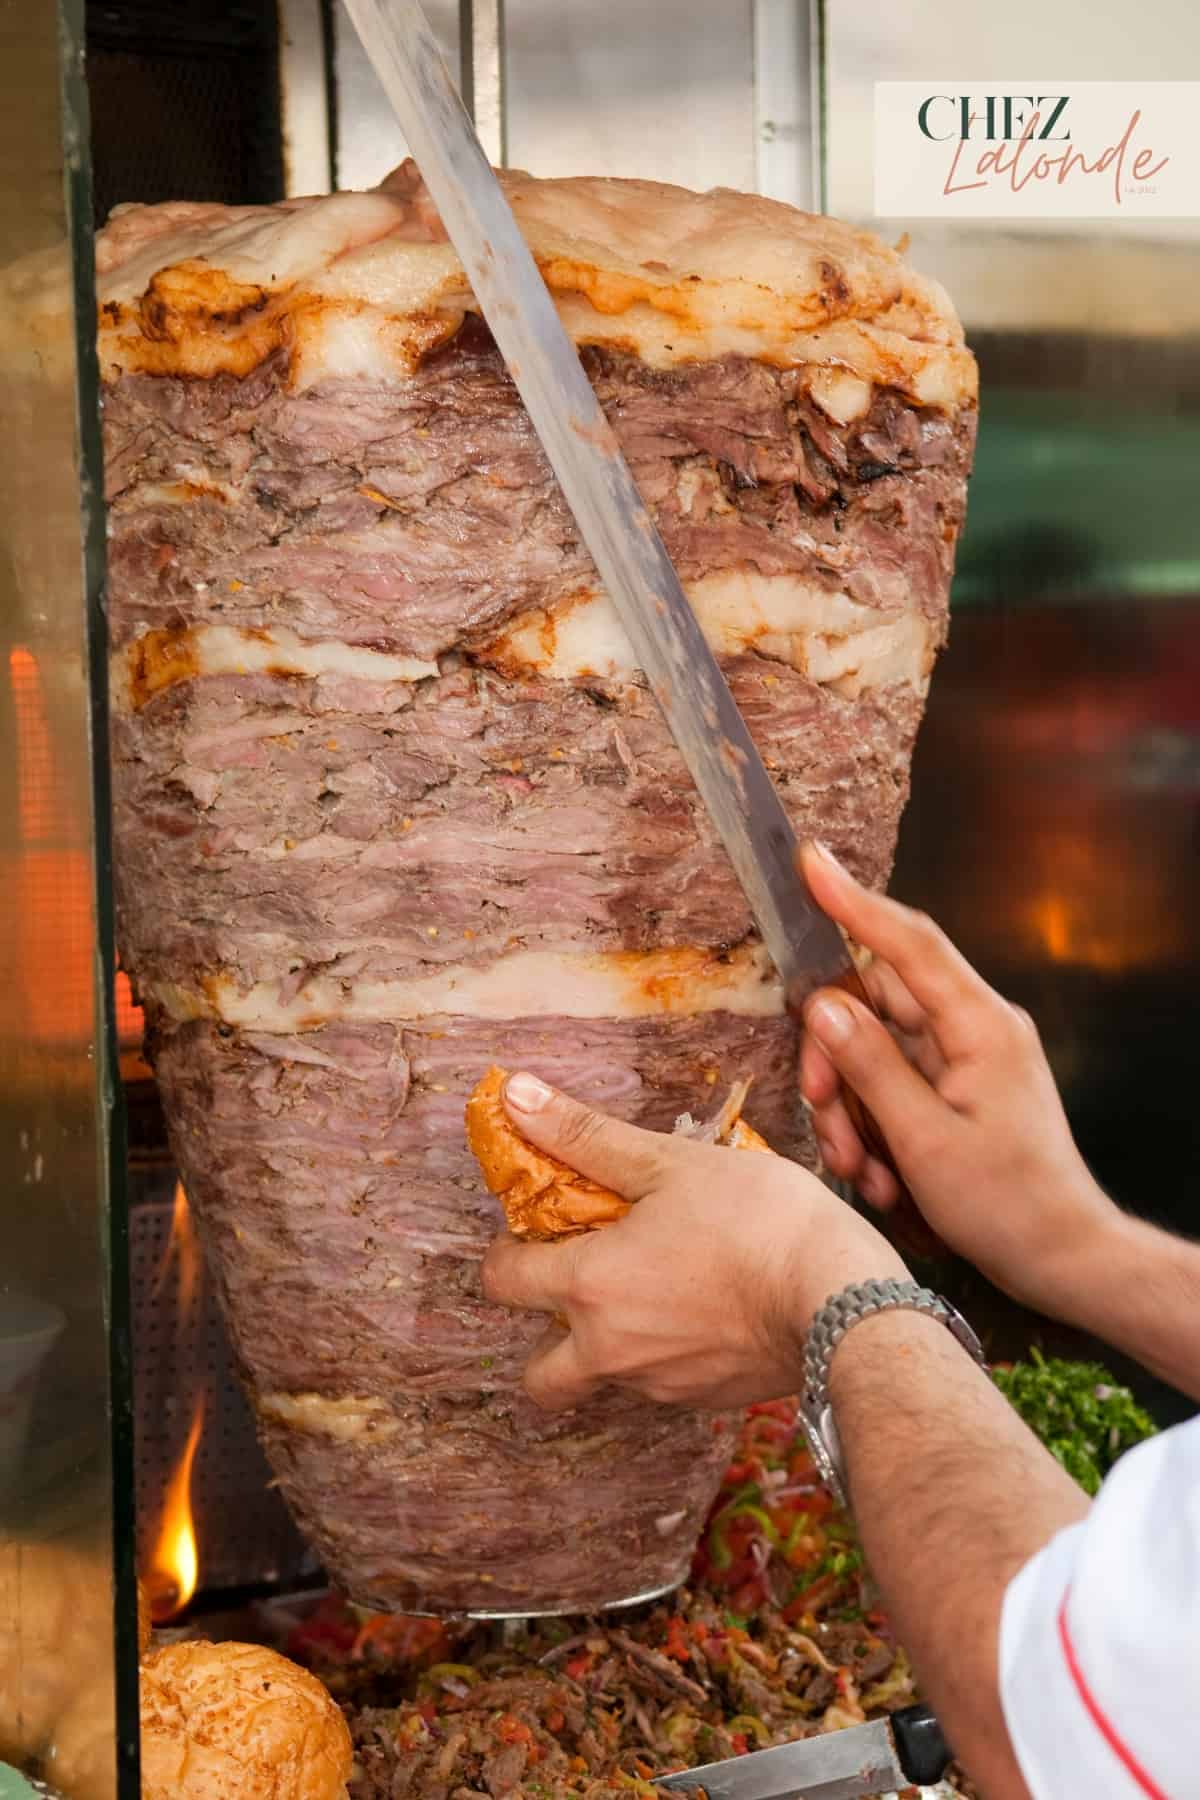 At restaurant, a chef is slicing some cooked shawarma off of the rotisserie. 